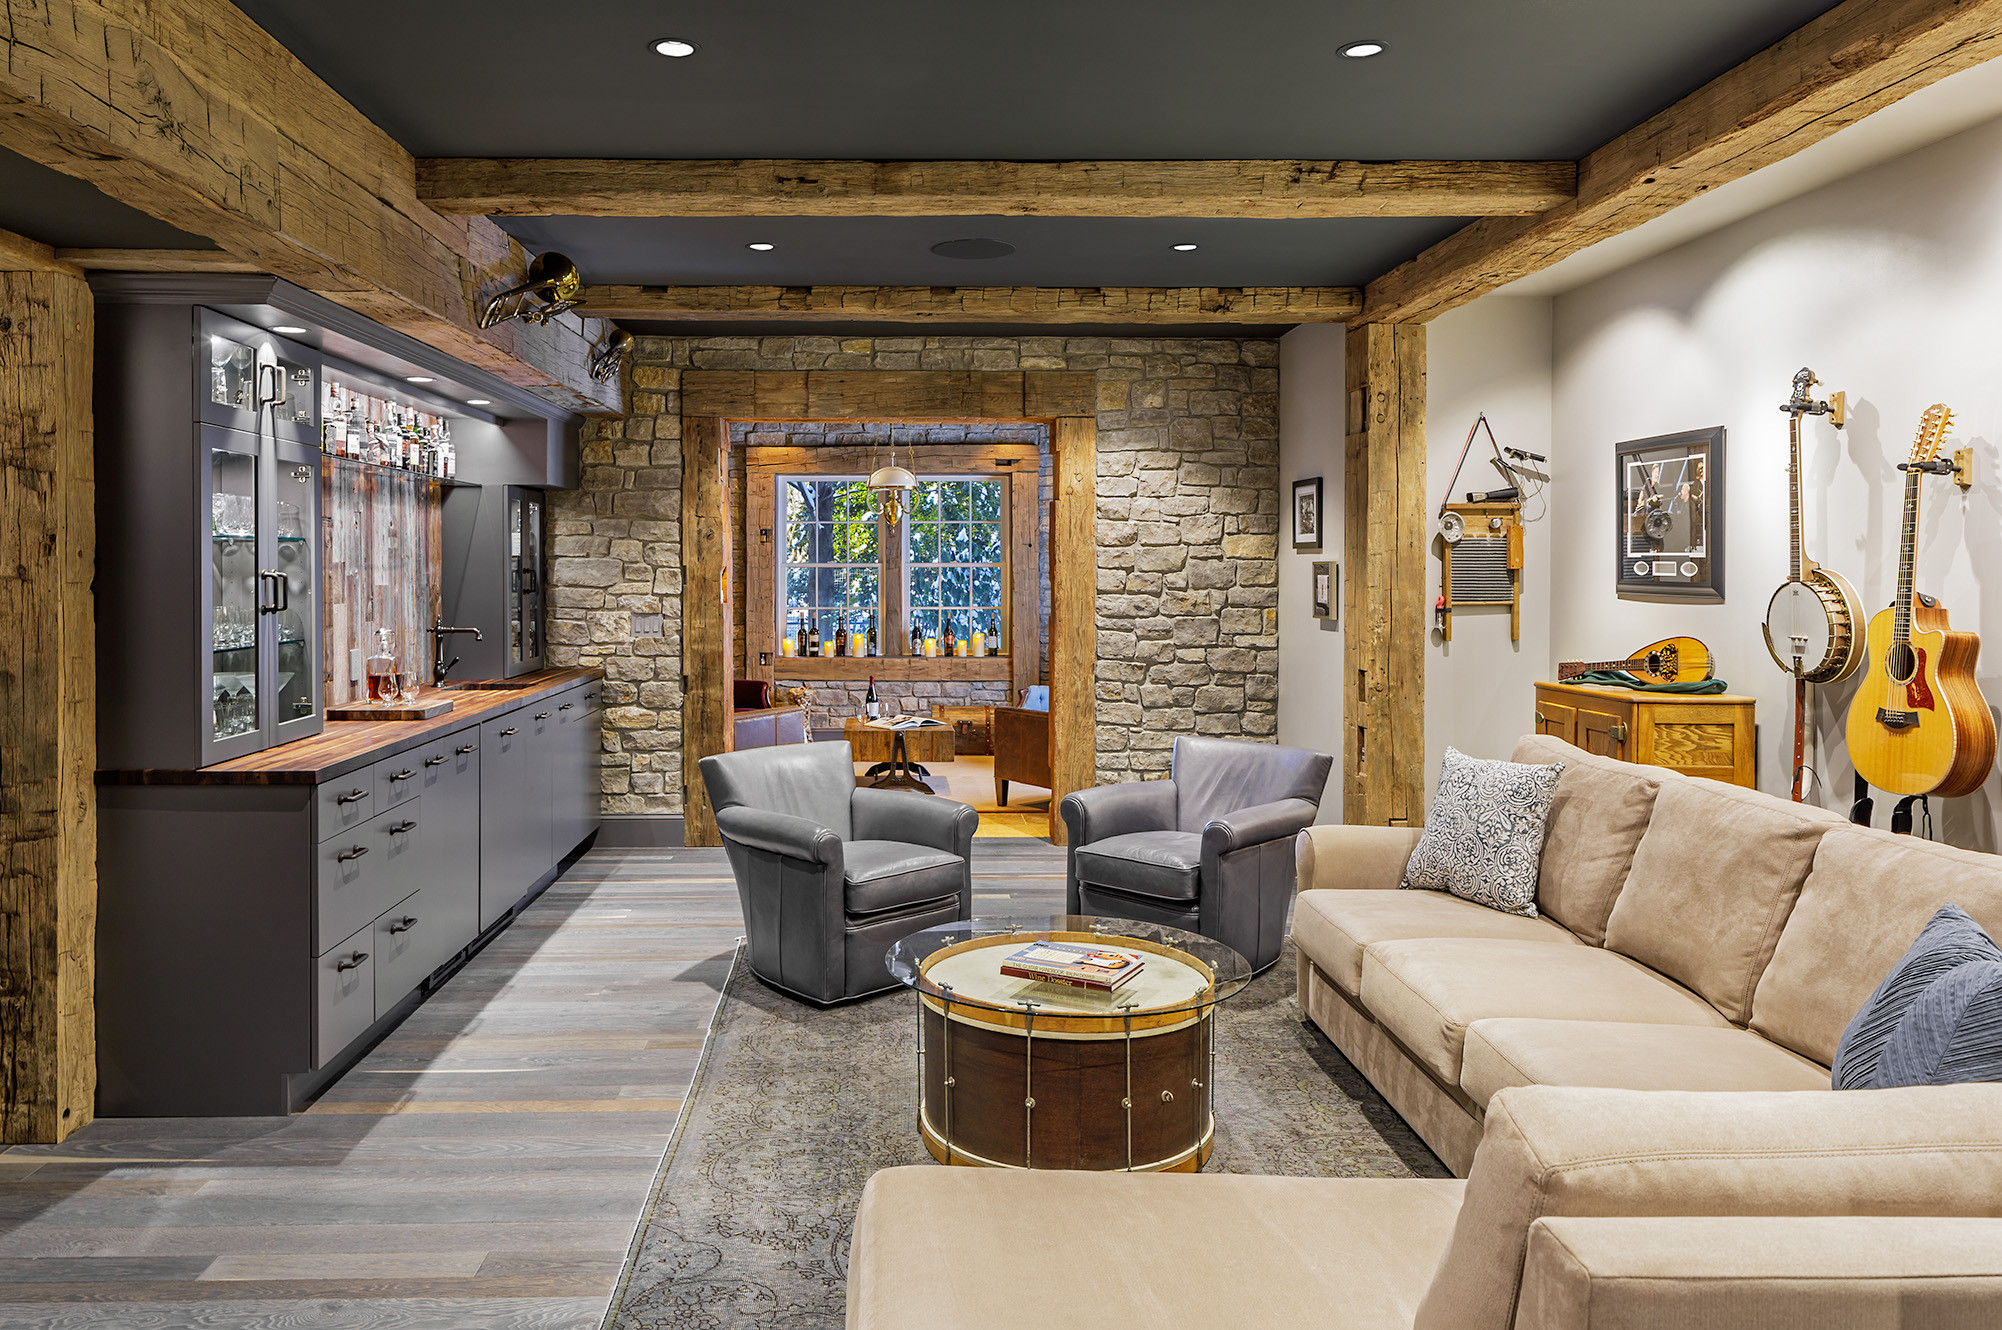 75 Beautiful Rustic Basement Pictures Ideas May 2021 Houzz